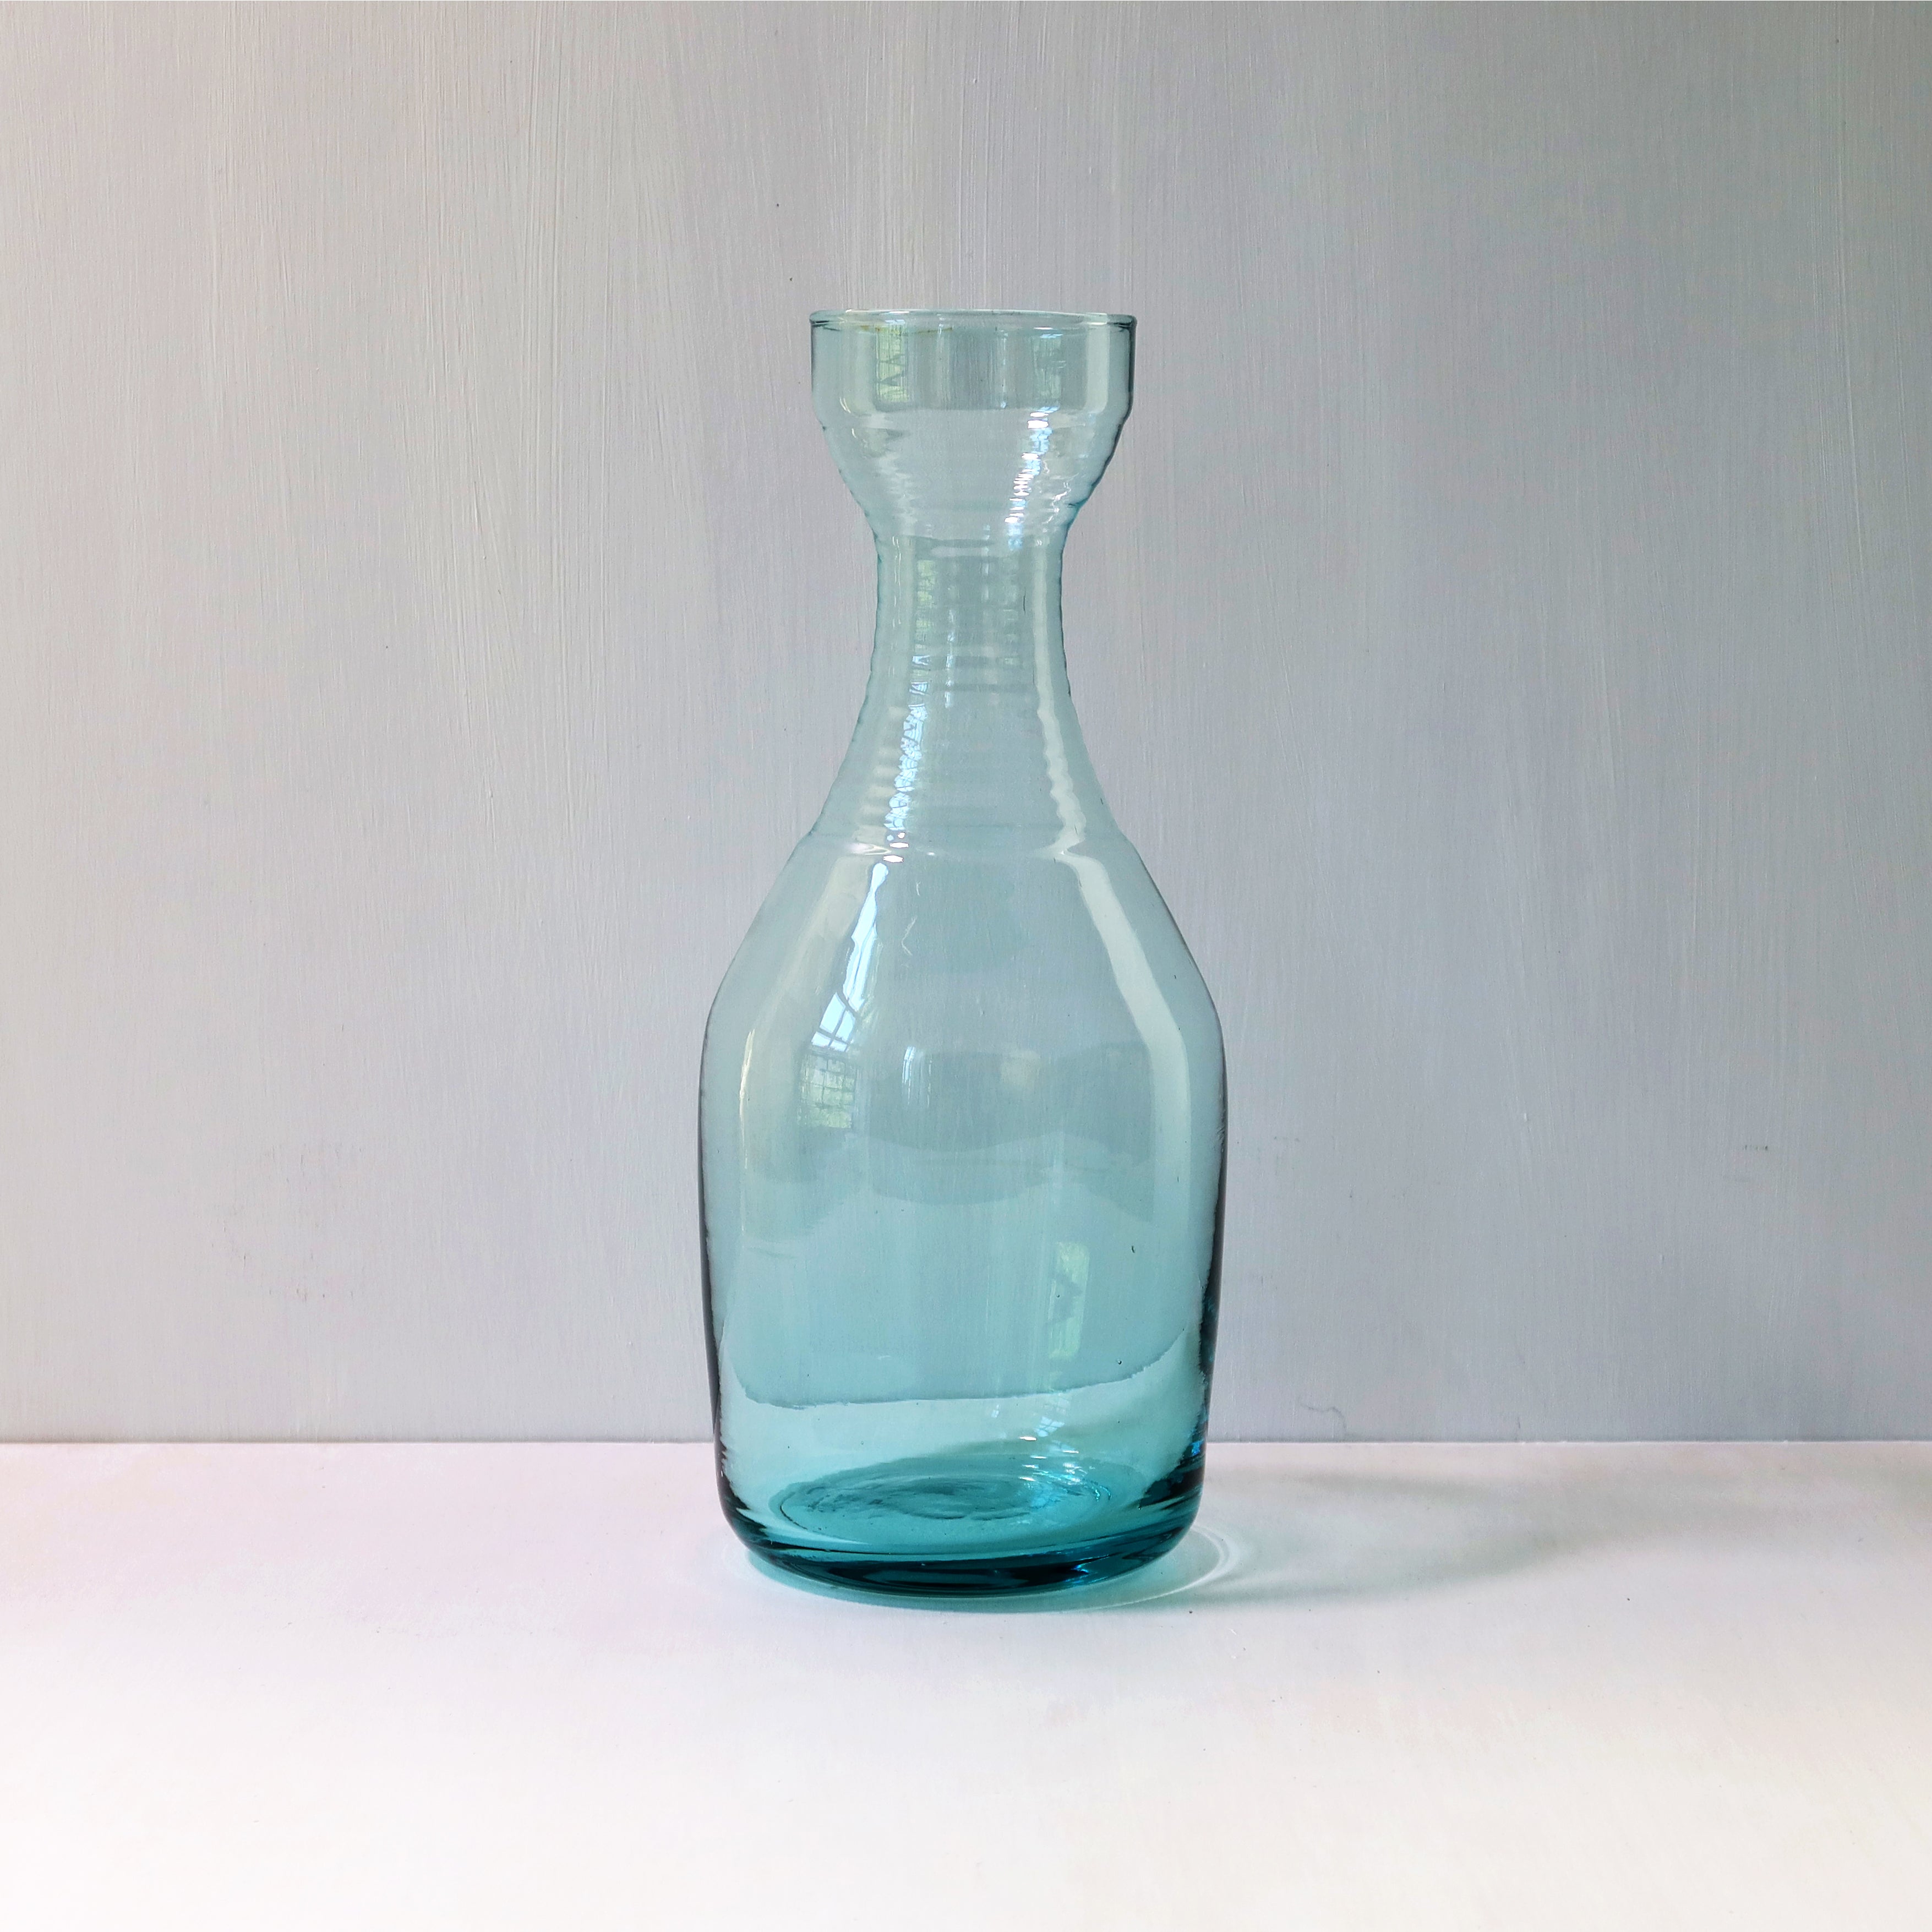 Seeded Round Carafe and Glass Set